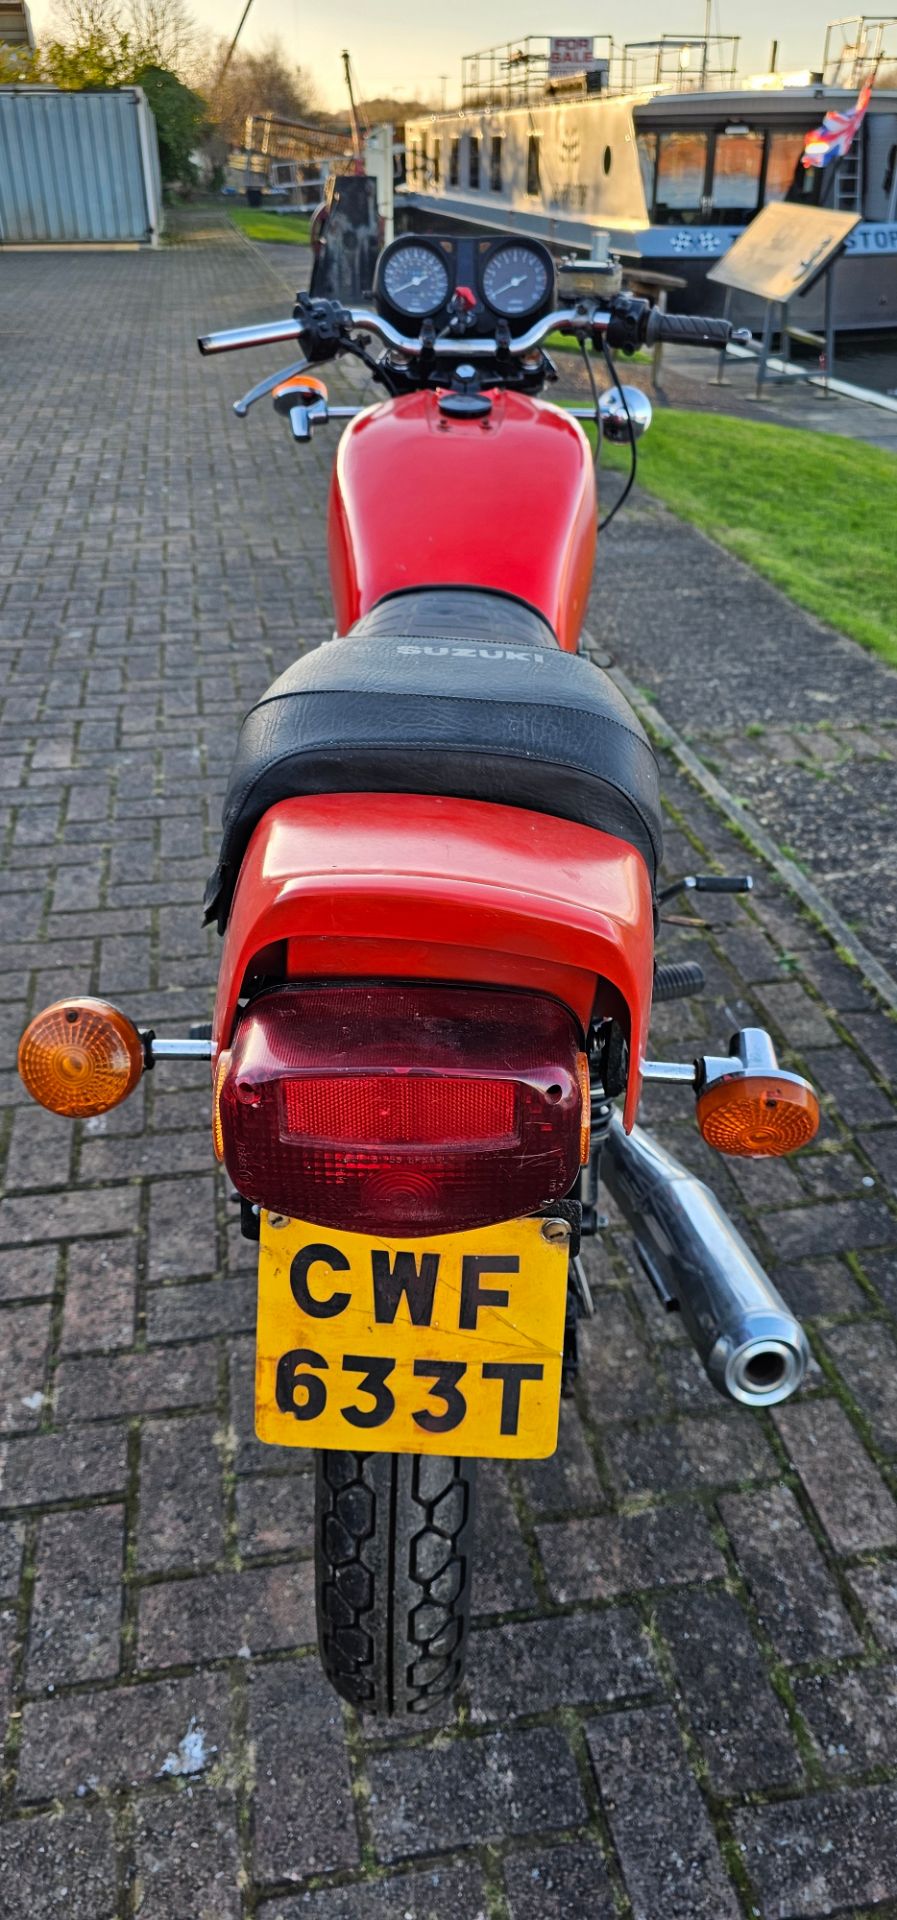 1979 Suzuki GS 550, 548cc. Registration number CWF 633T. Frame number not found. Engine number GS550 - Image 4 of 12